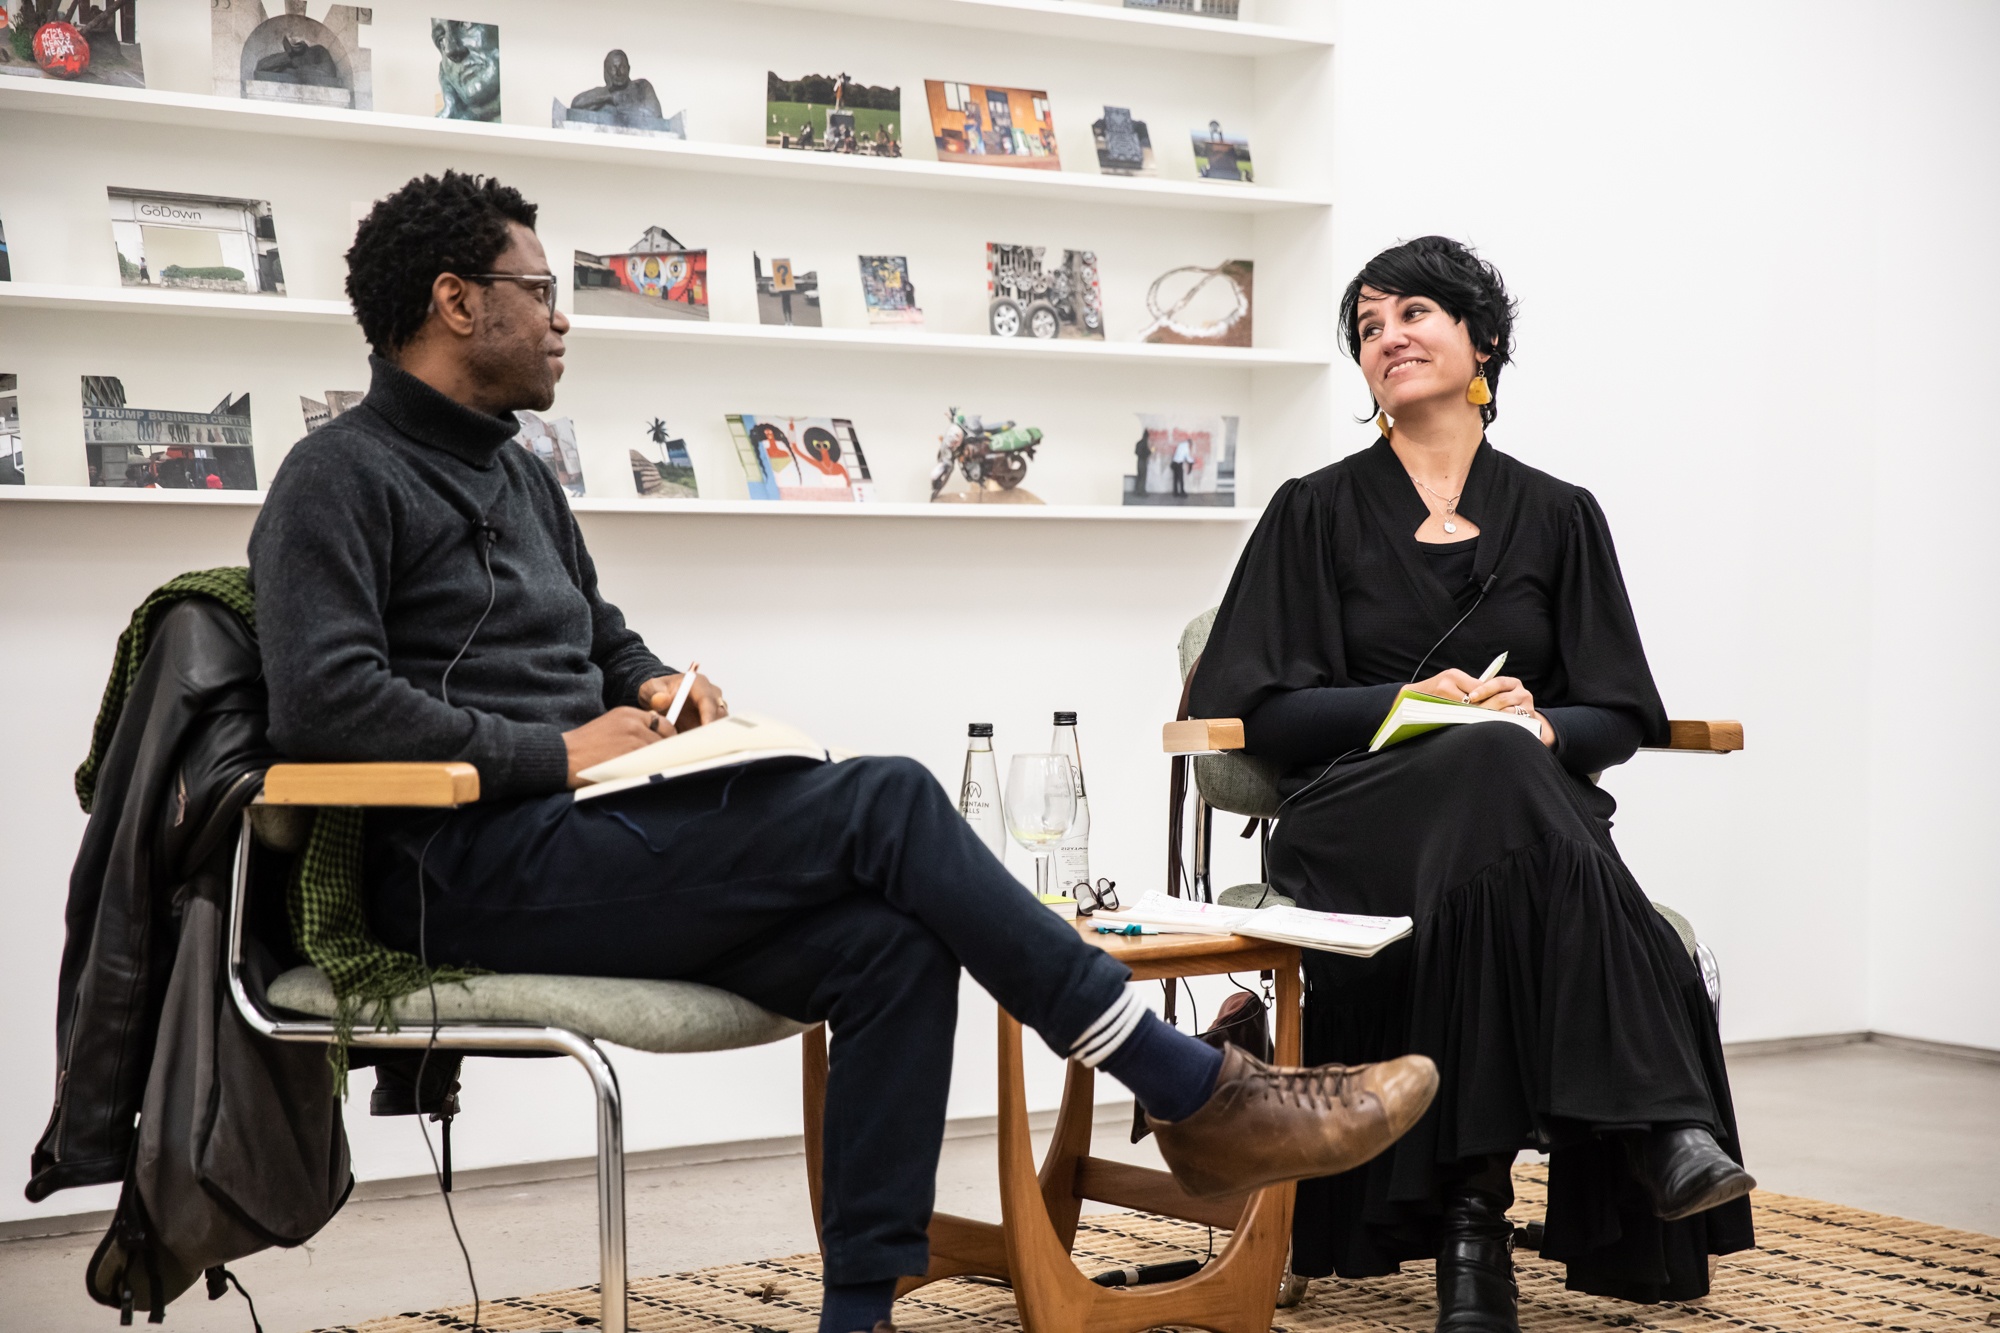 Event photograph from the book launch of Kim Gurney’s ‘Panya Routes’ in A4’s Reading Room shows Gurney and Neo Muyanga seated in conversation.
